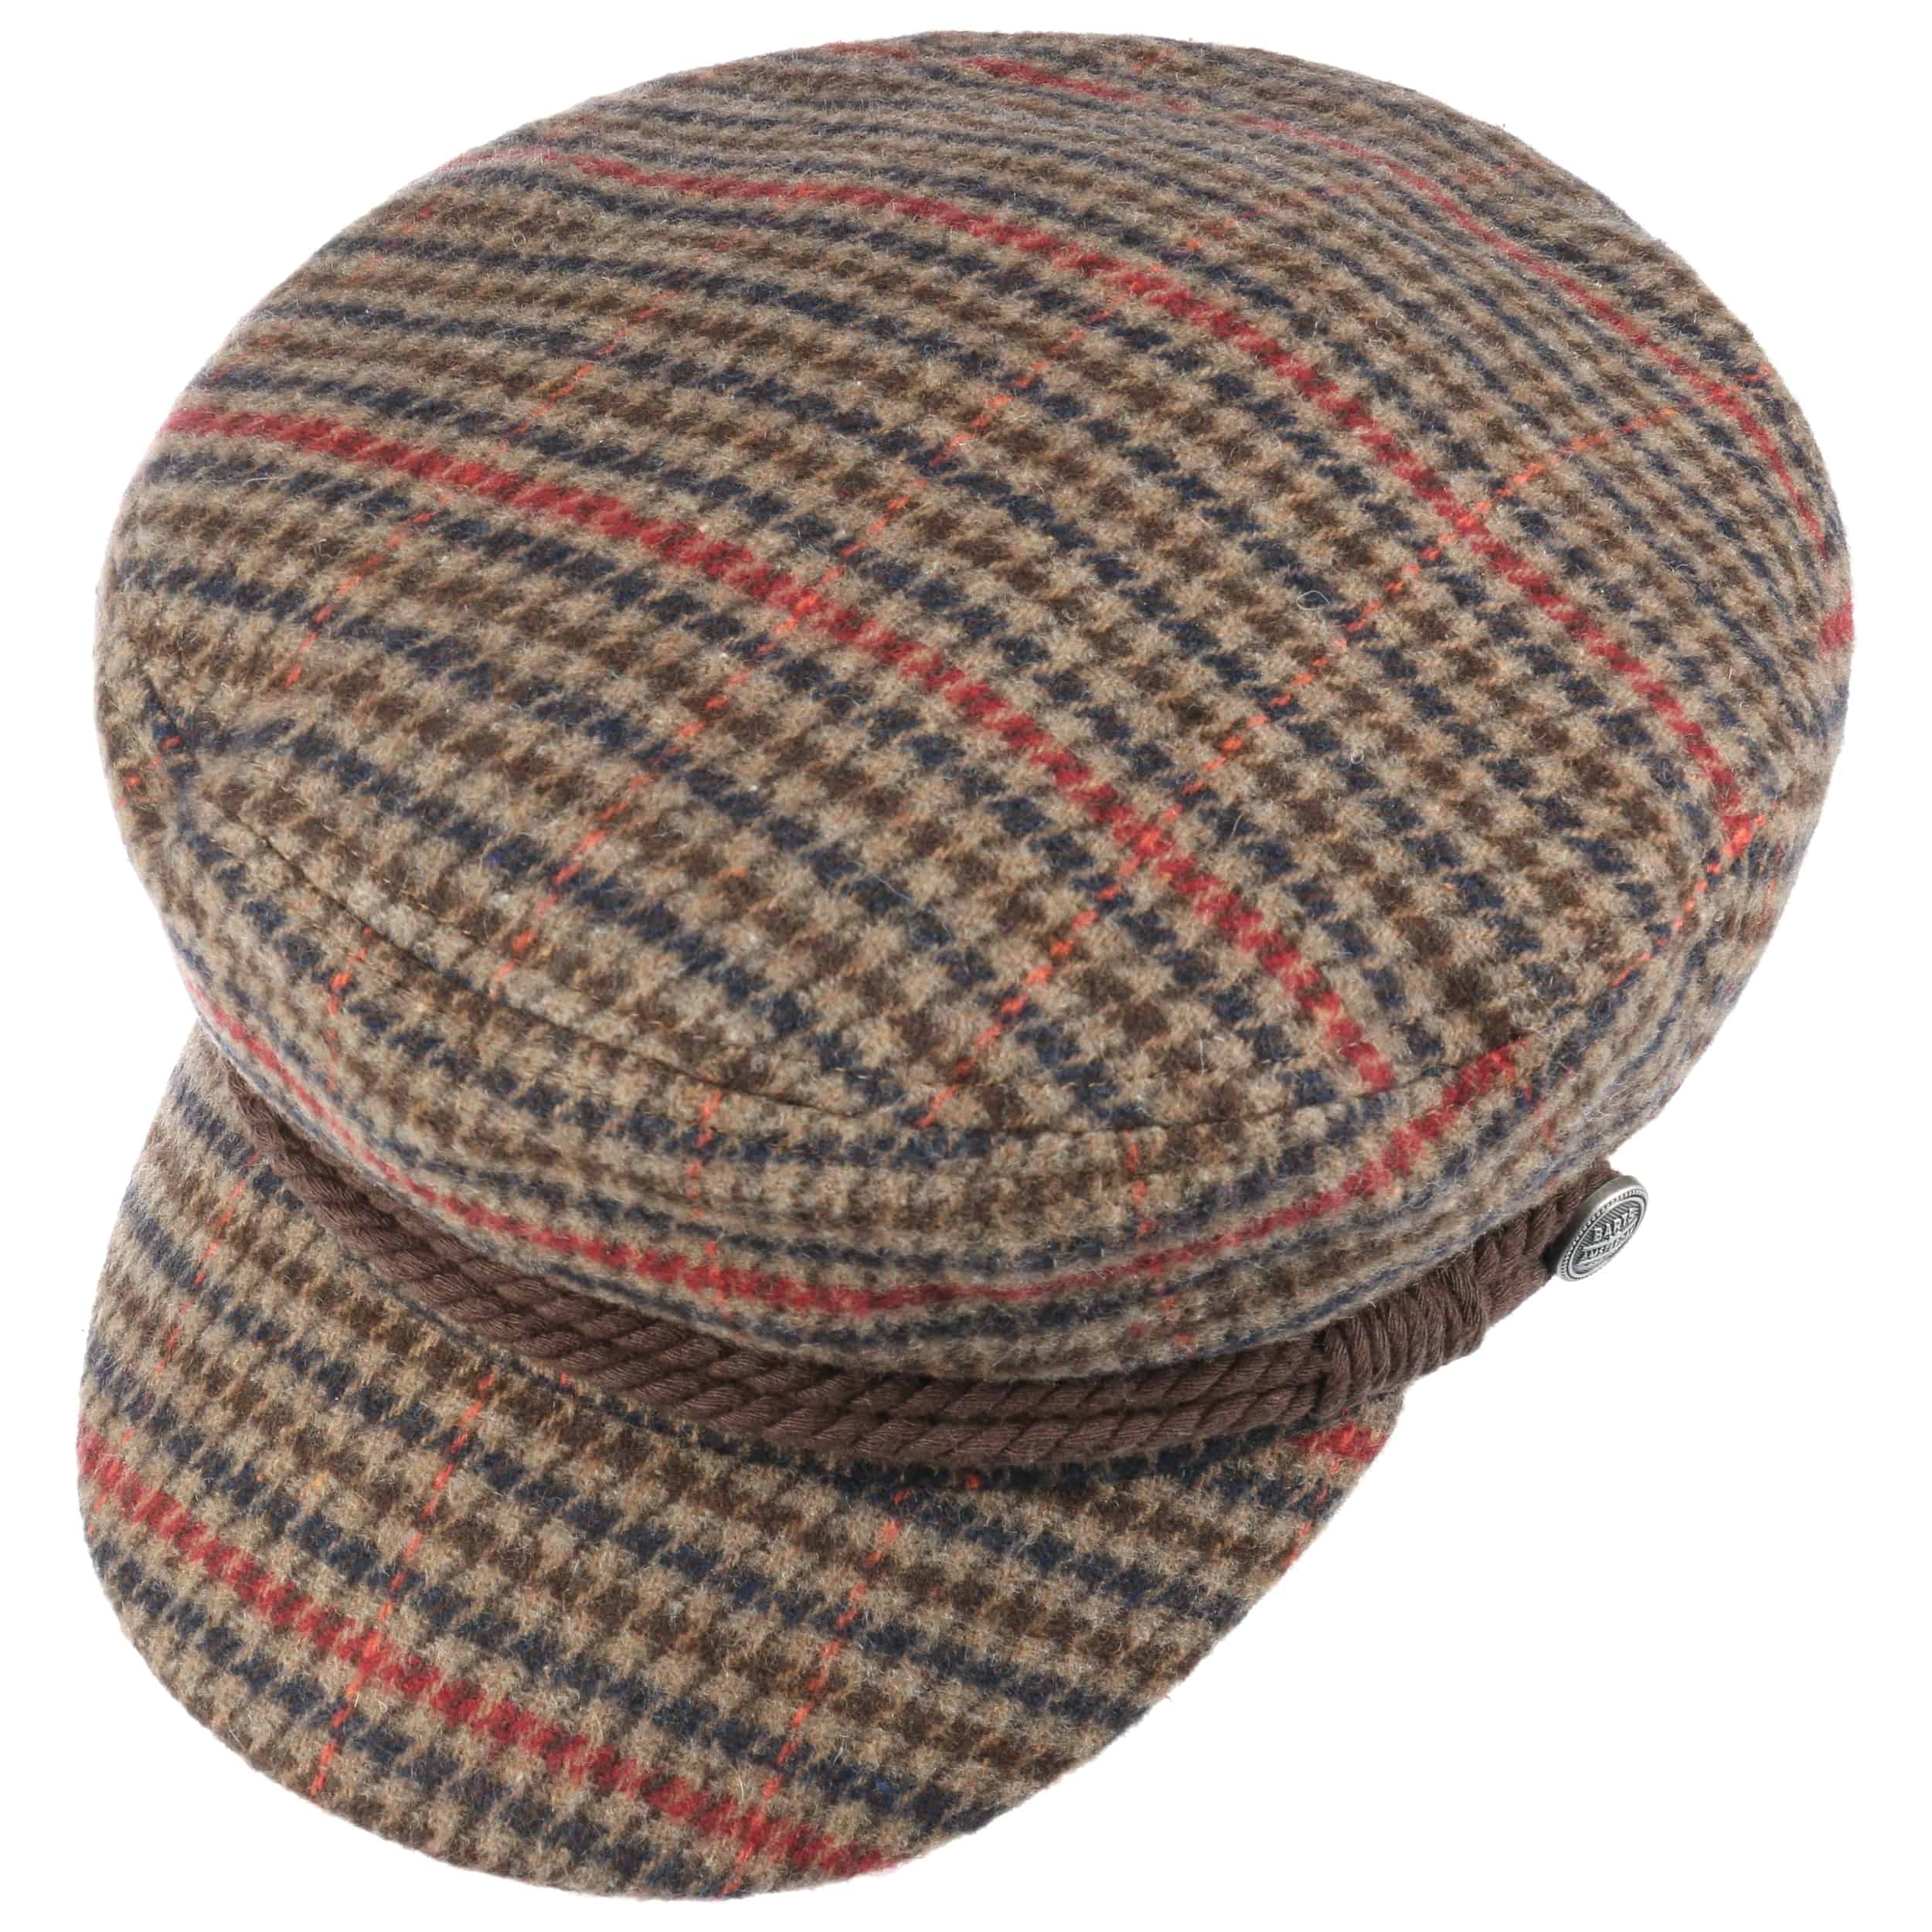 Skipper Houndstooth Fisherman´s Cap by Barts - 32,95